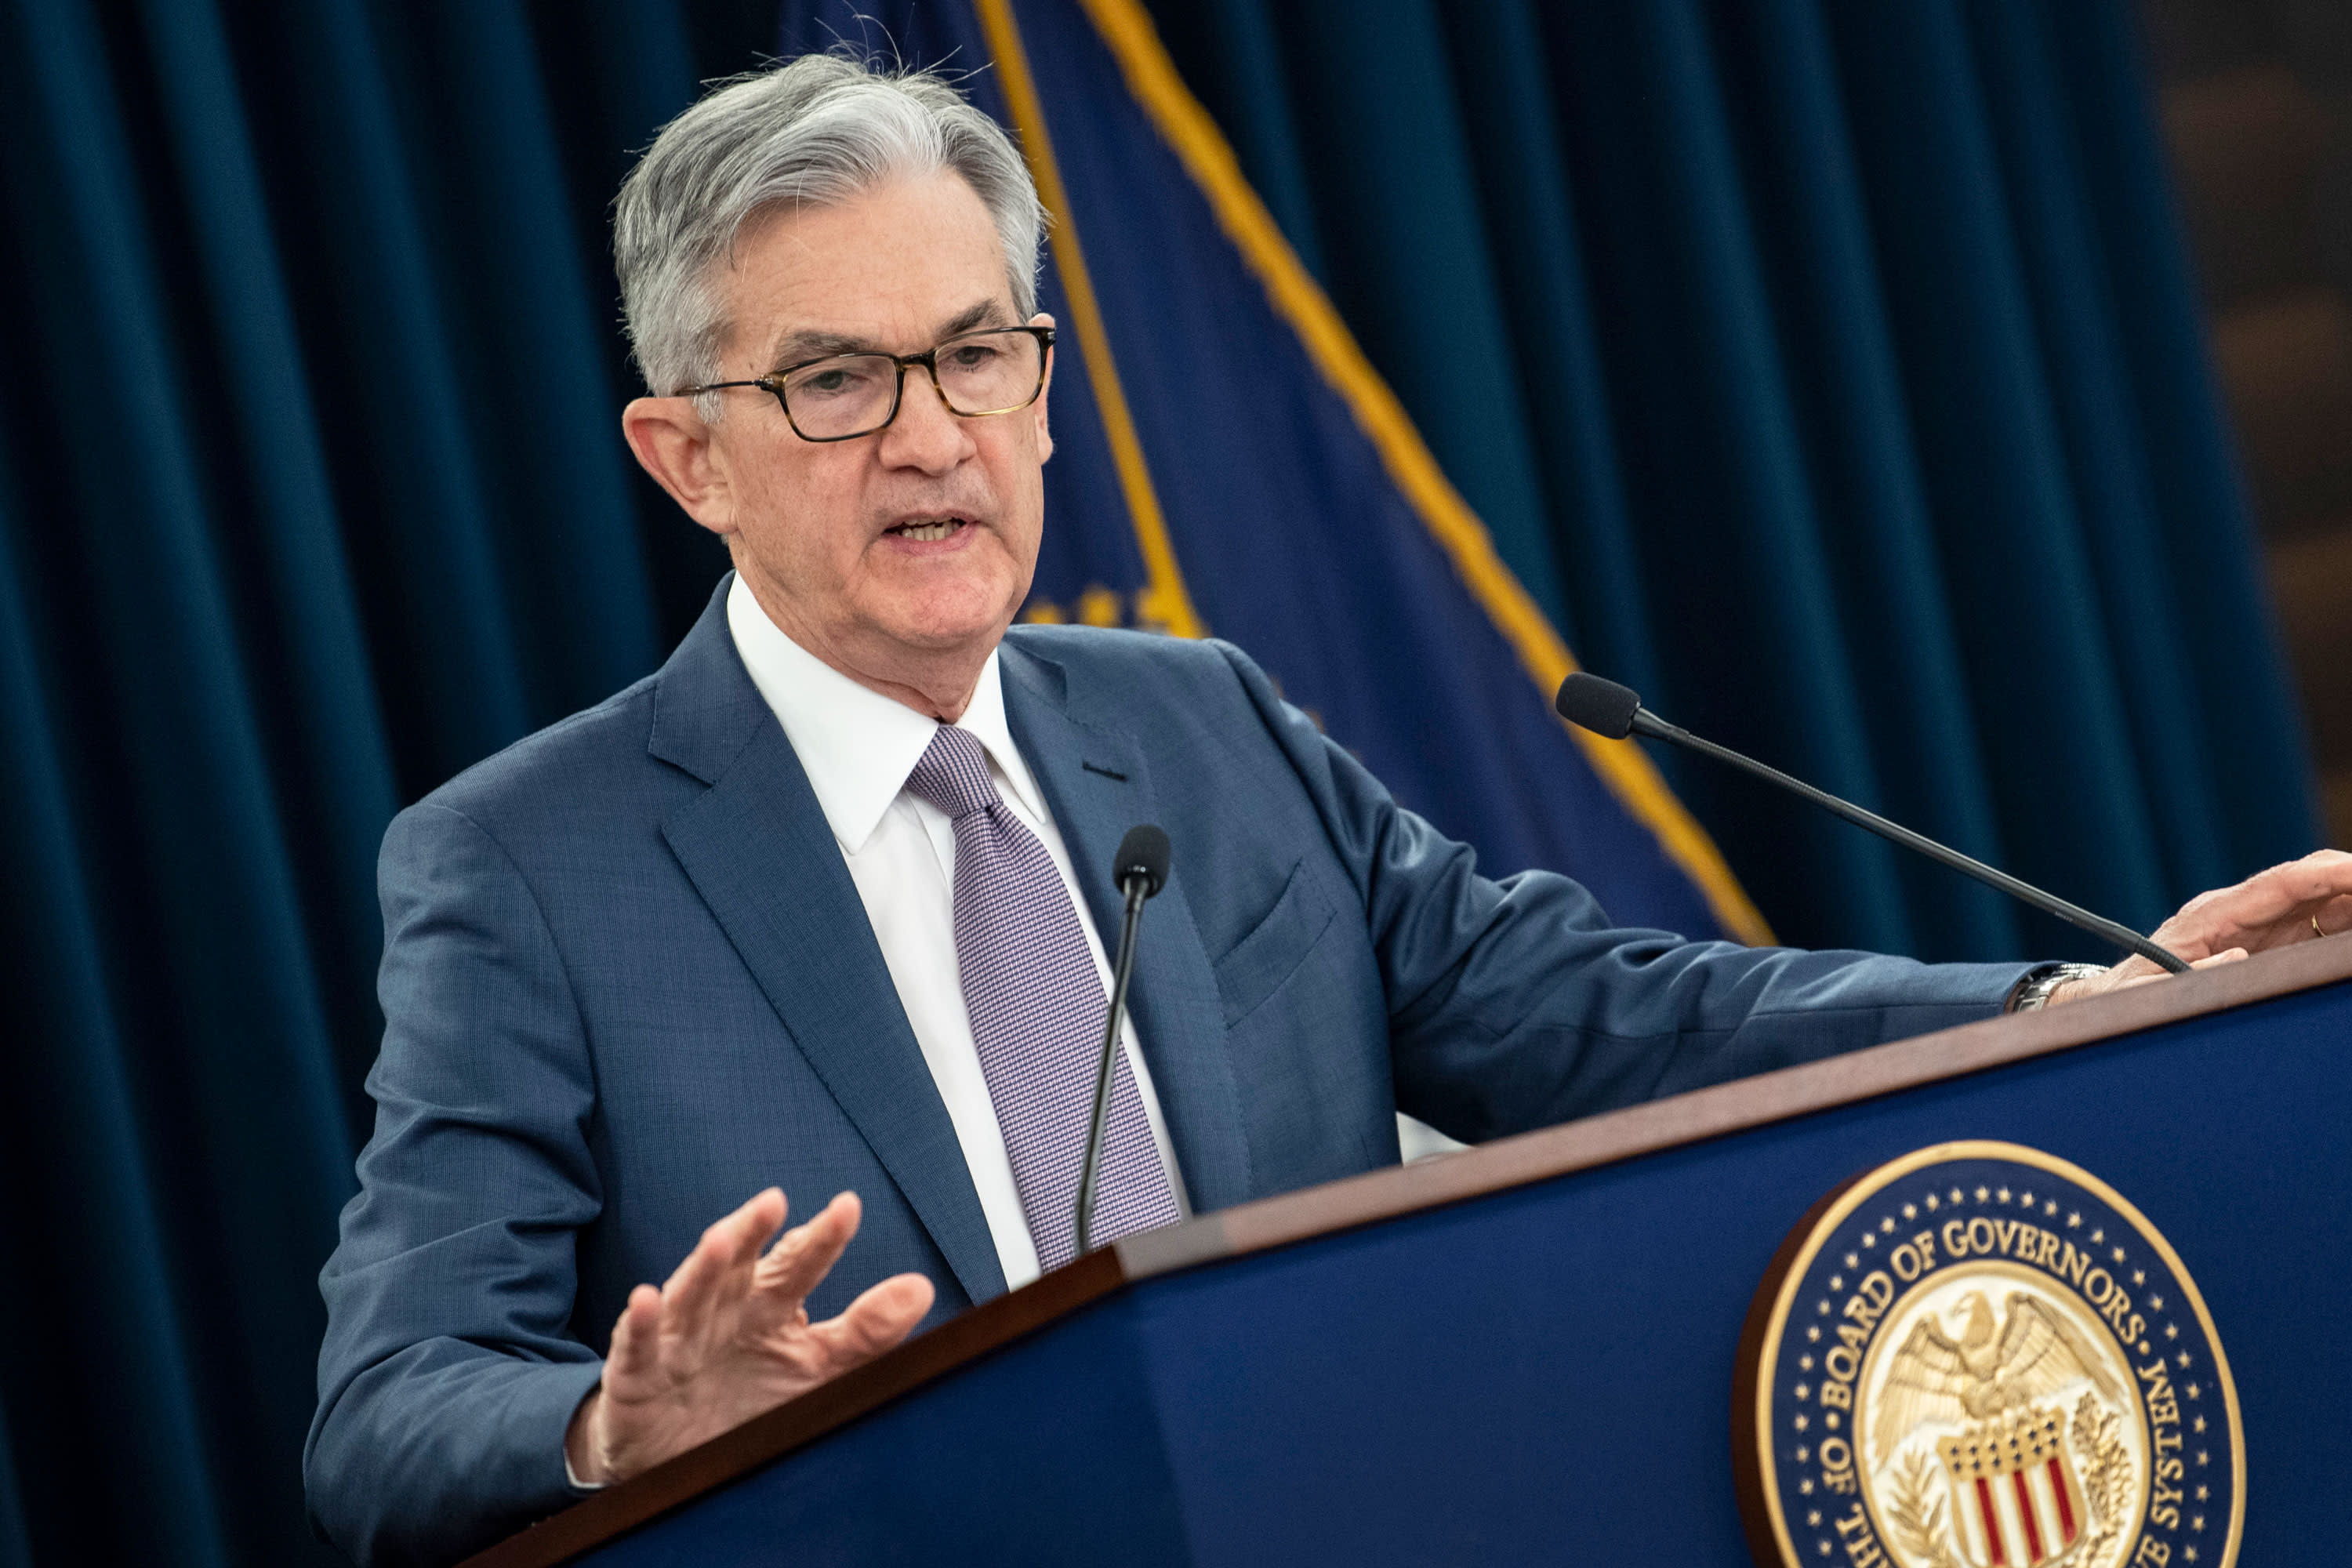 Jerome Powell is heavy favorite on Wall Street to be renominated as Fed chair